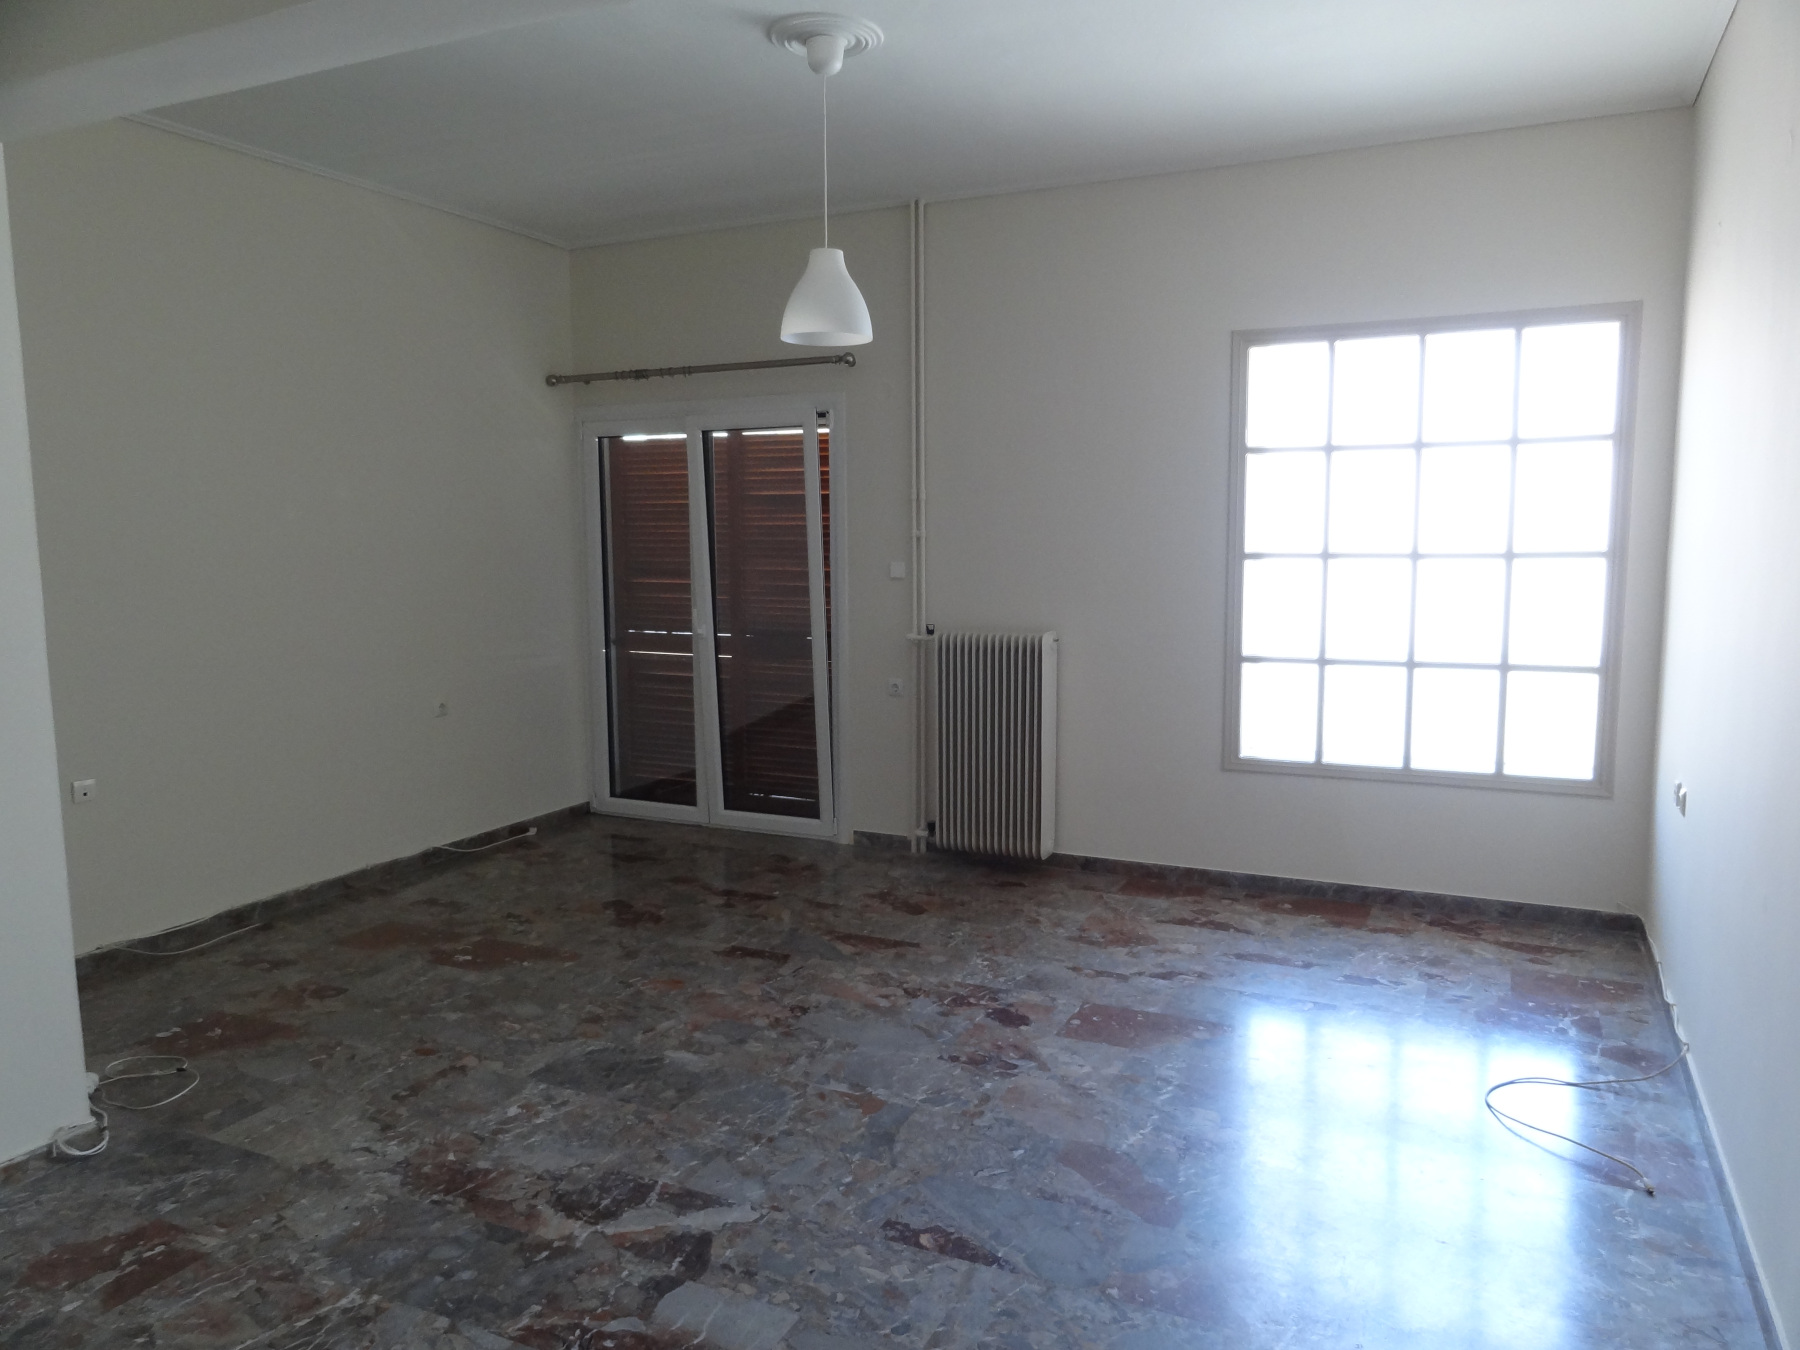 For rent, a spacious  bedroom apartment of 65 sq.m. 2nd floor near Velaras in Ioannina